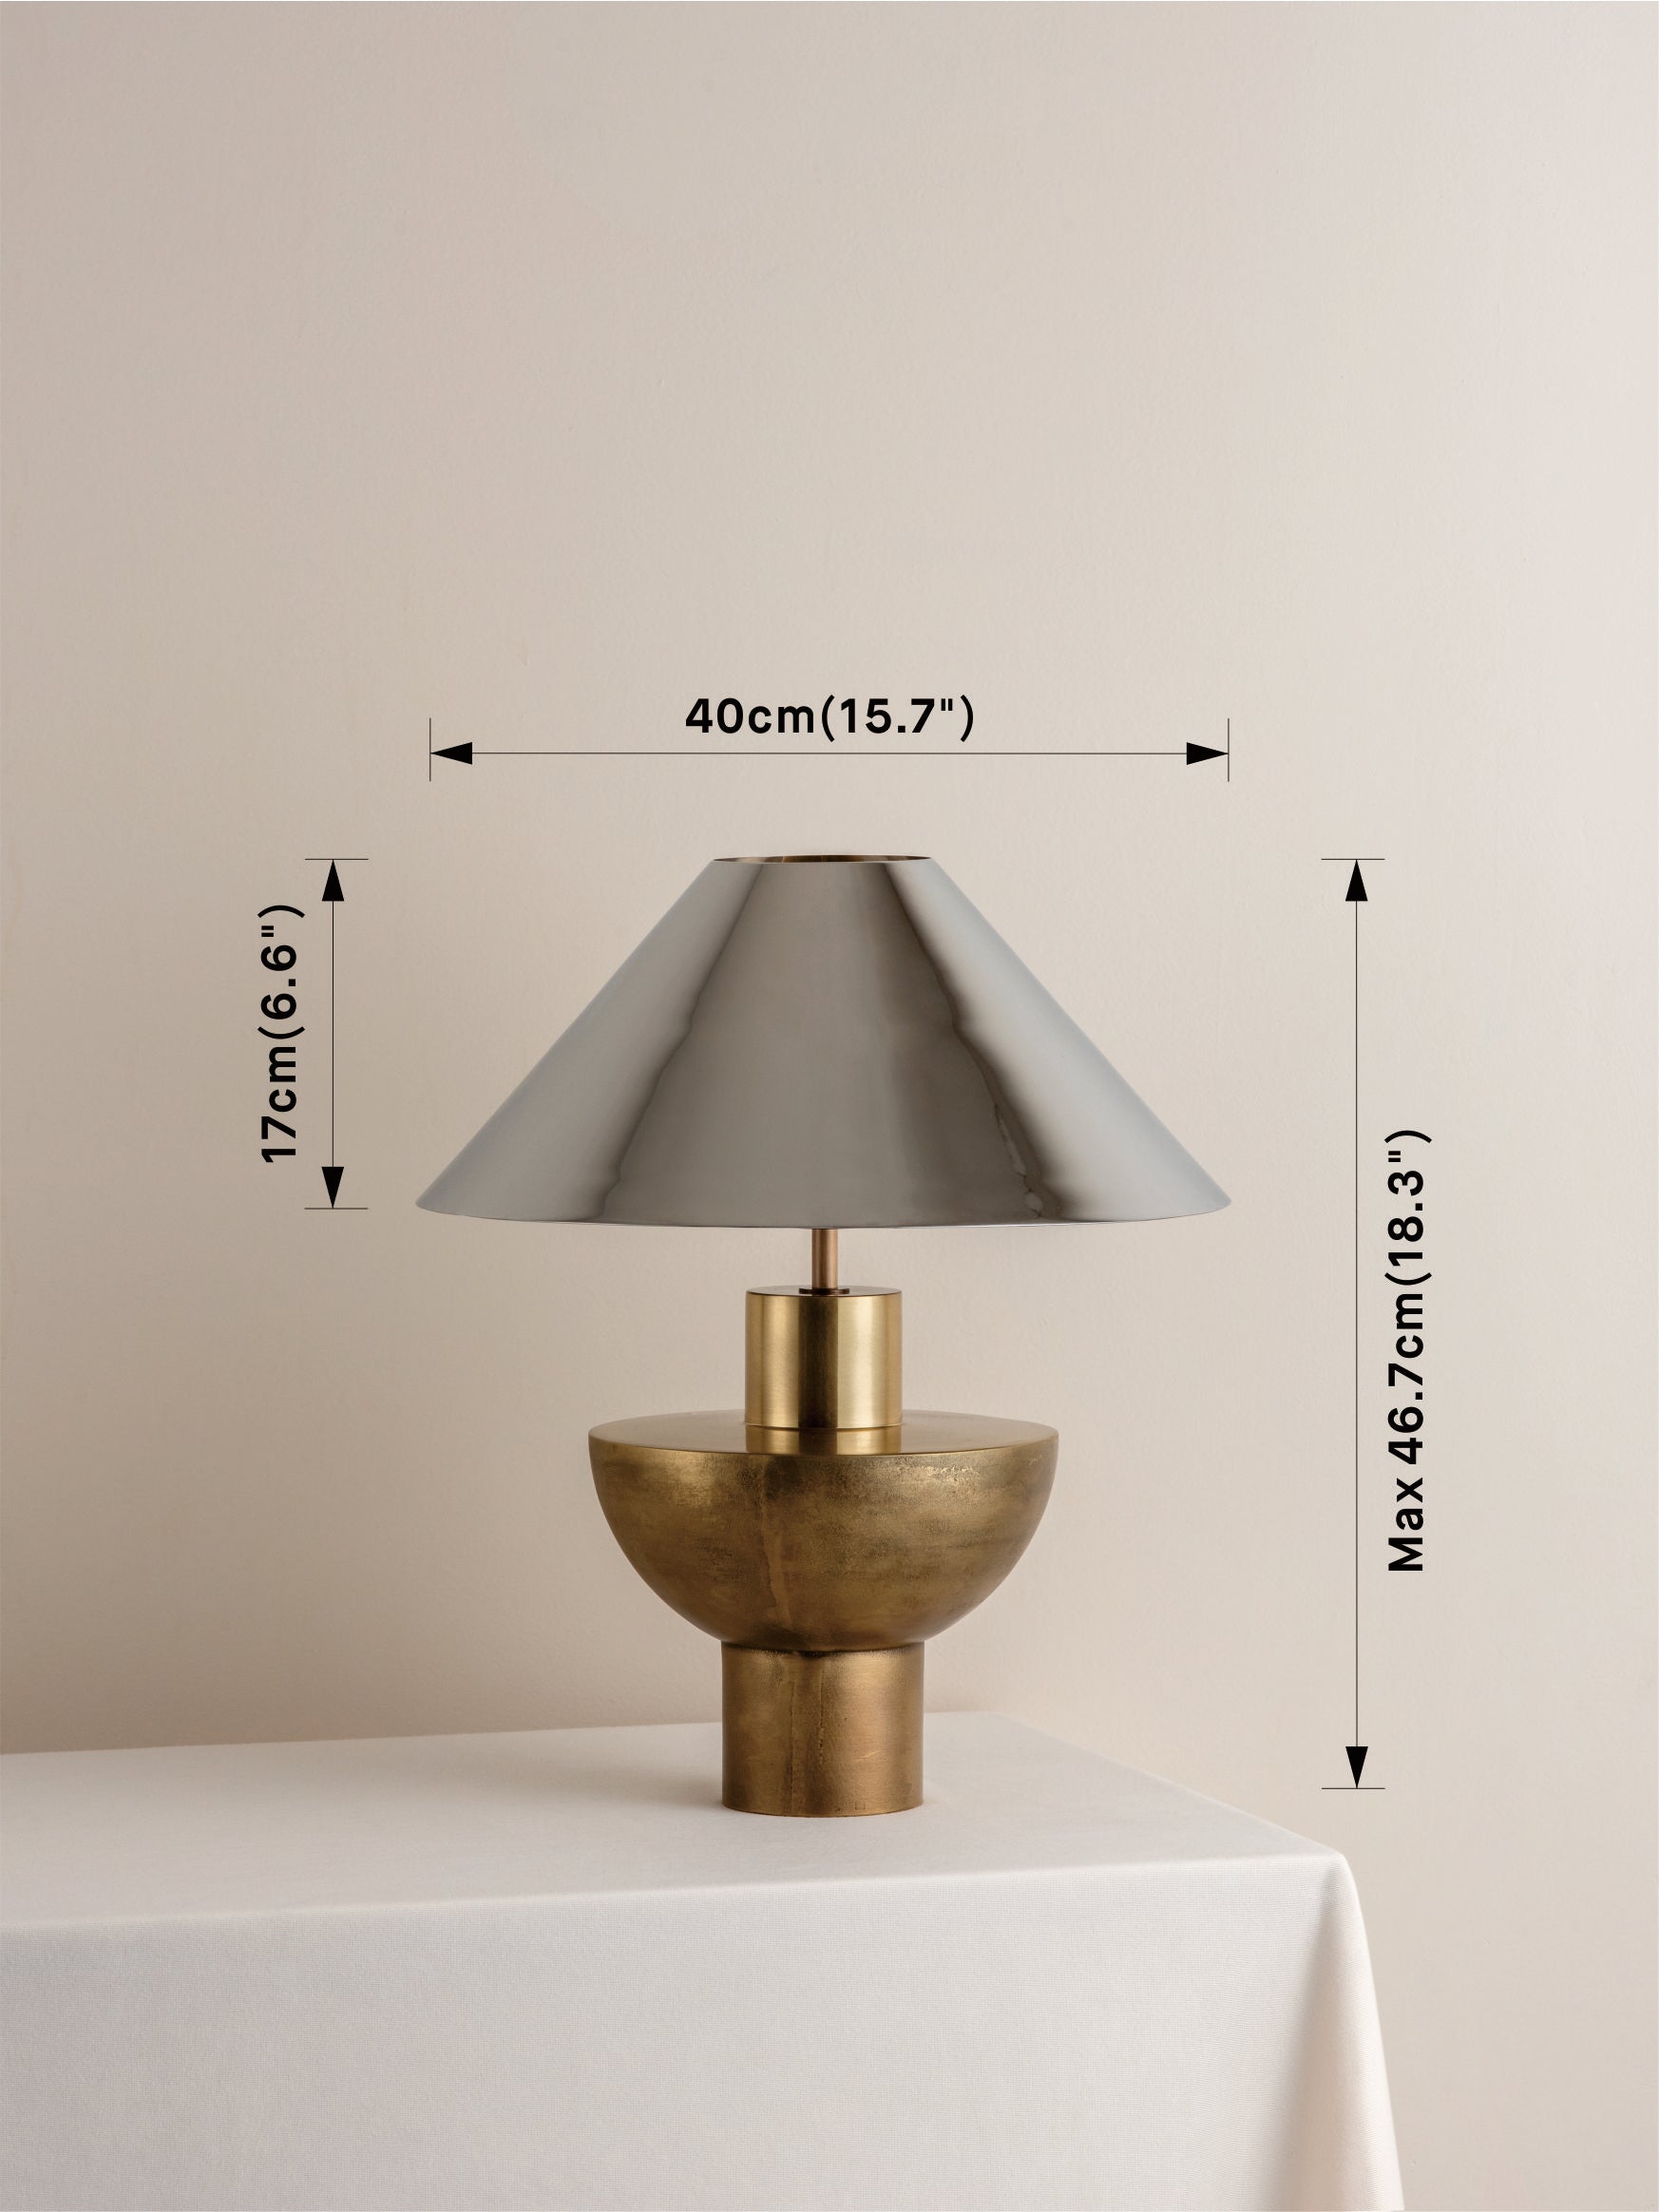 Editions brass lamp with + chrome shade | Table Lamp | Lights & Lamps Inc | Modern Affordable Designer Lighting | USA